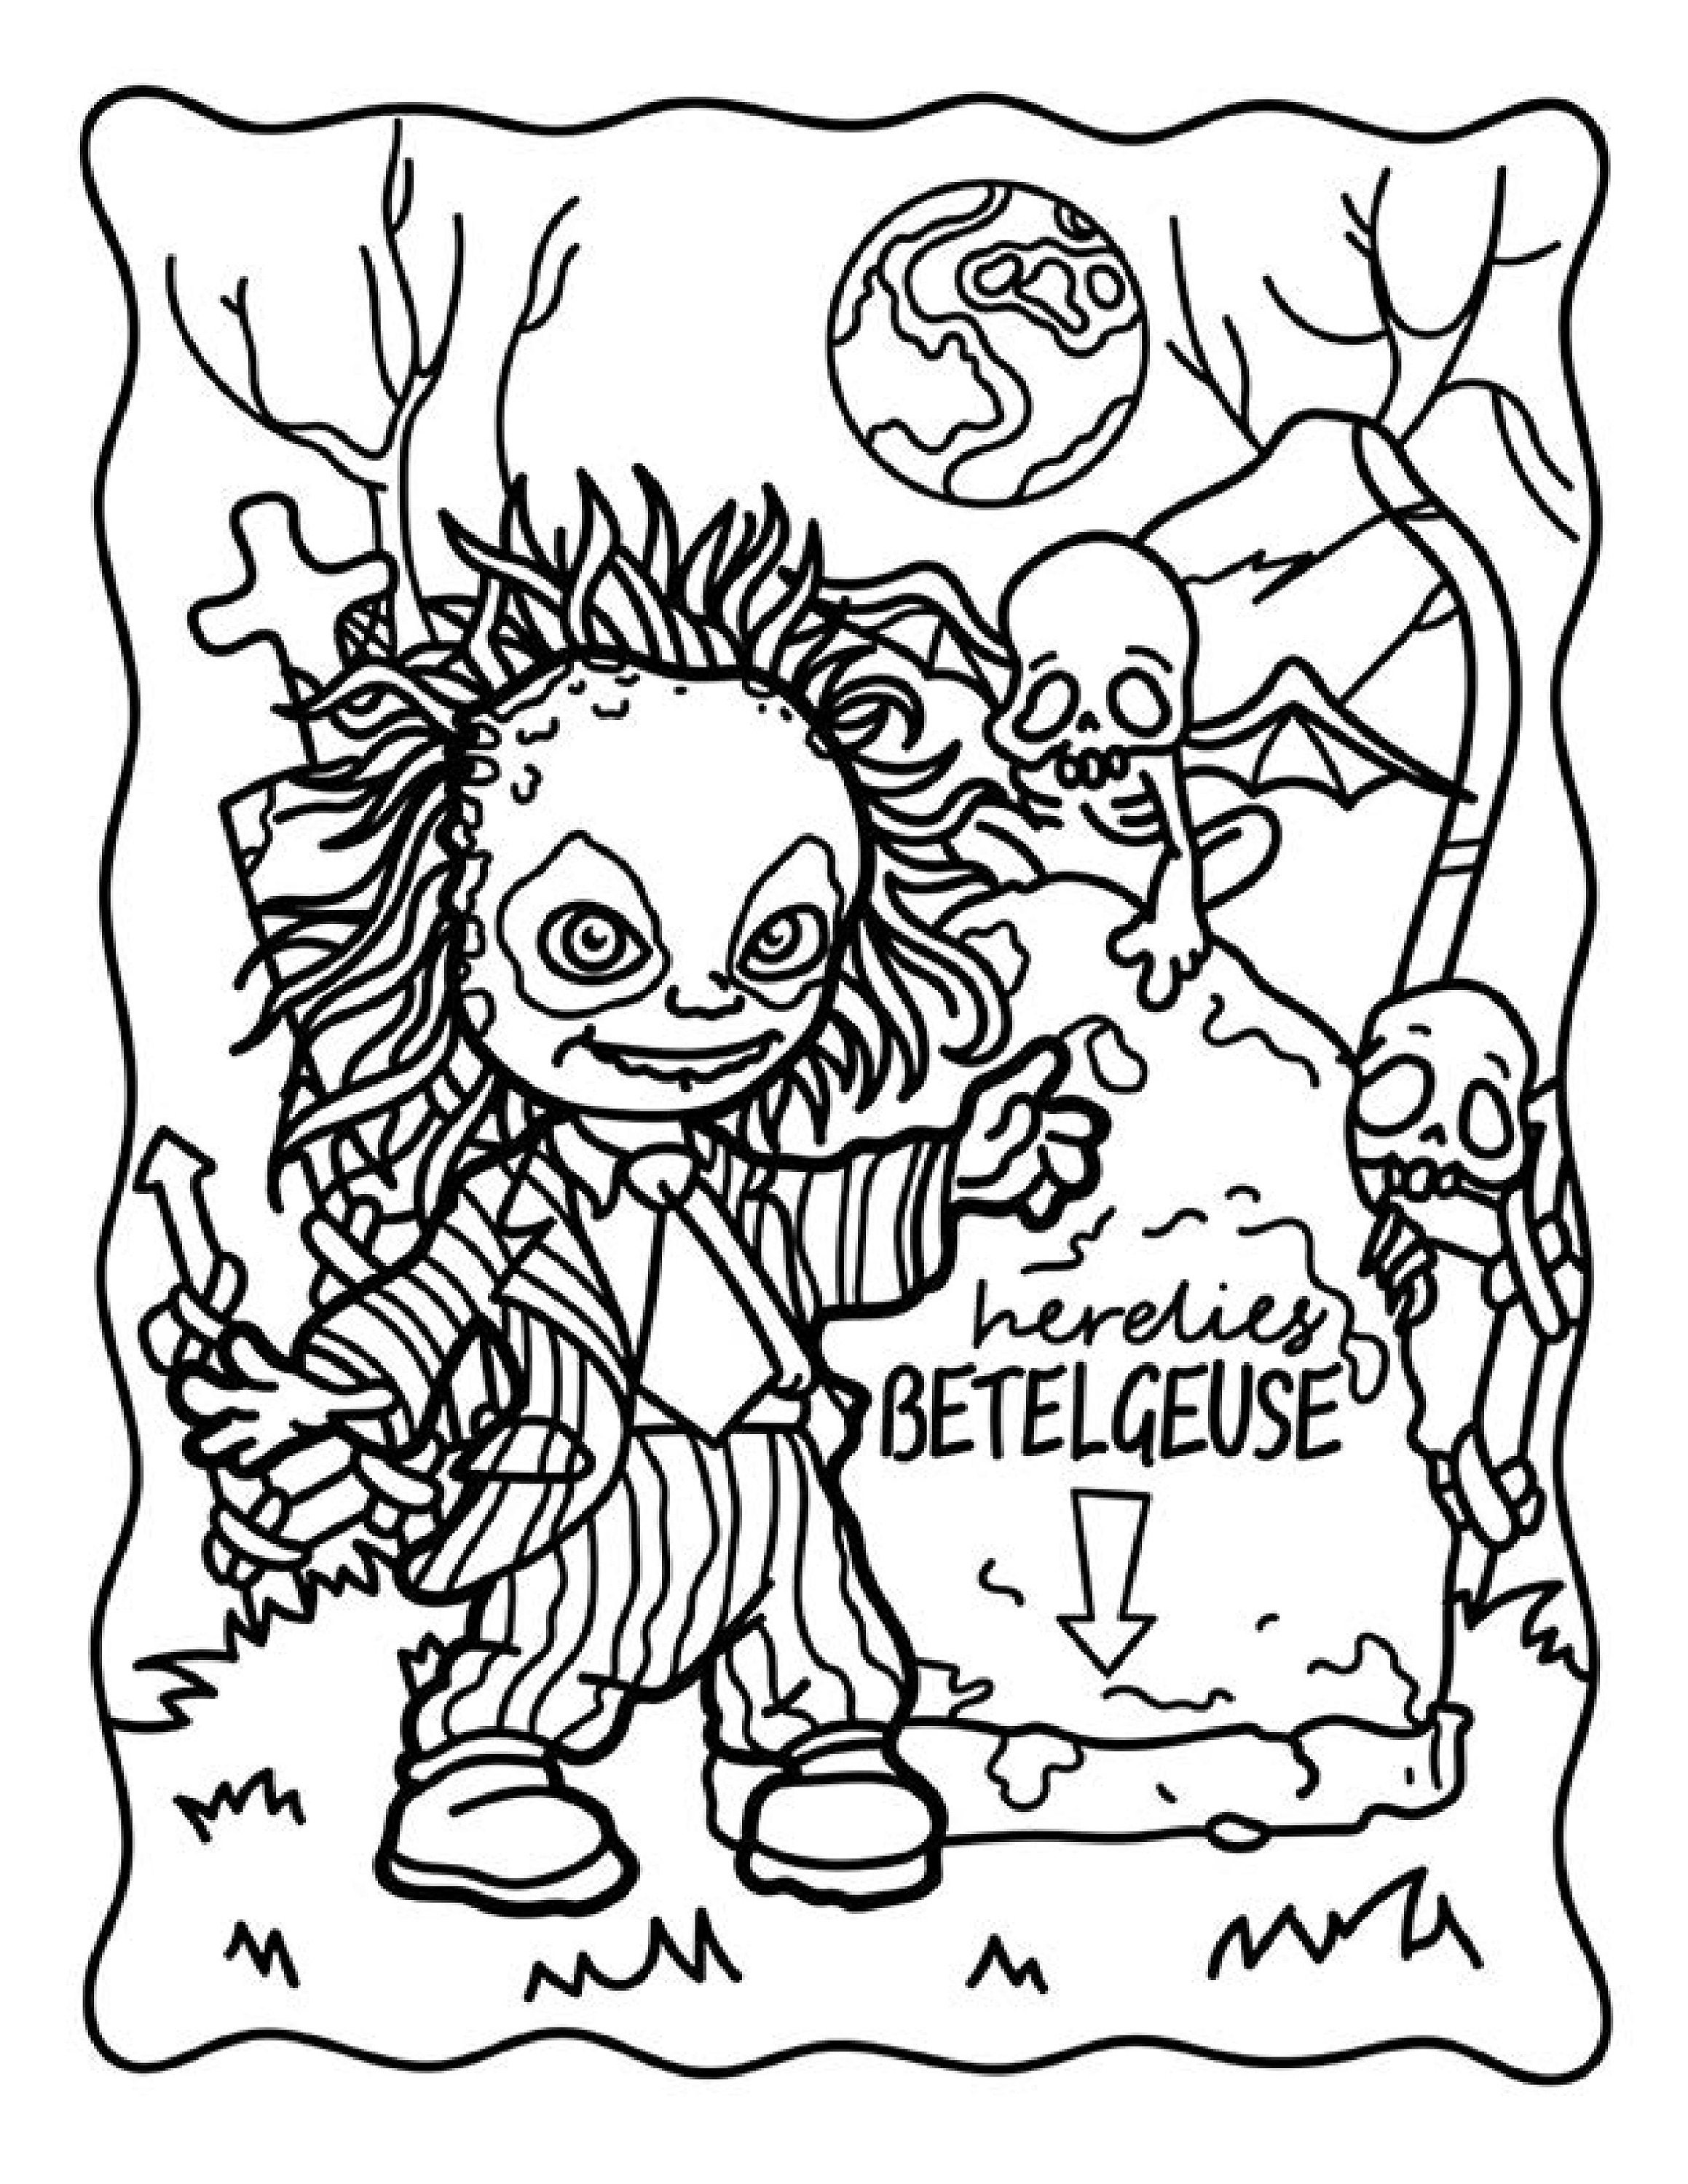 80 Halloween Coloring Pages: Spooky Fun for All Ages Printable